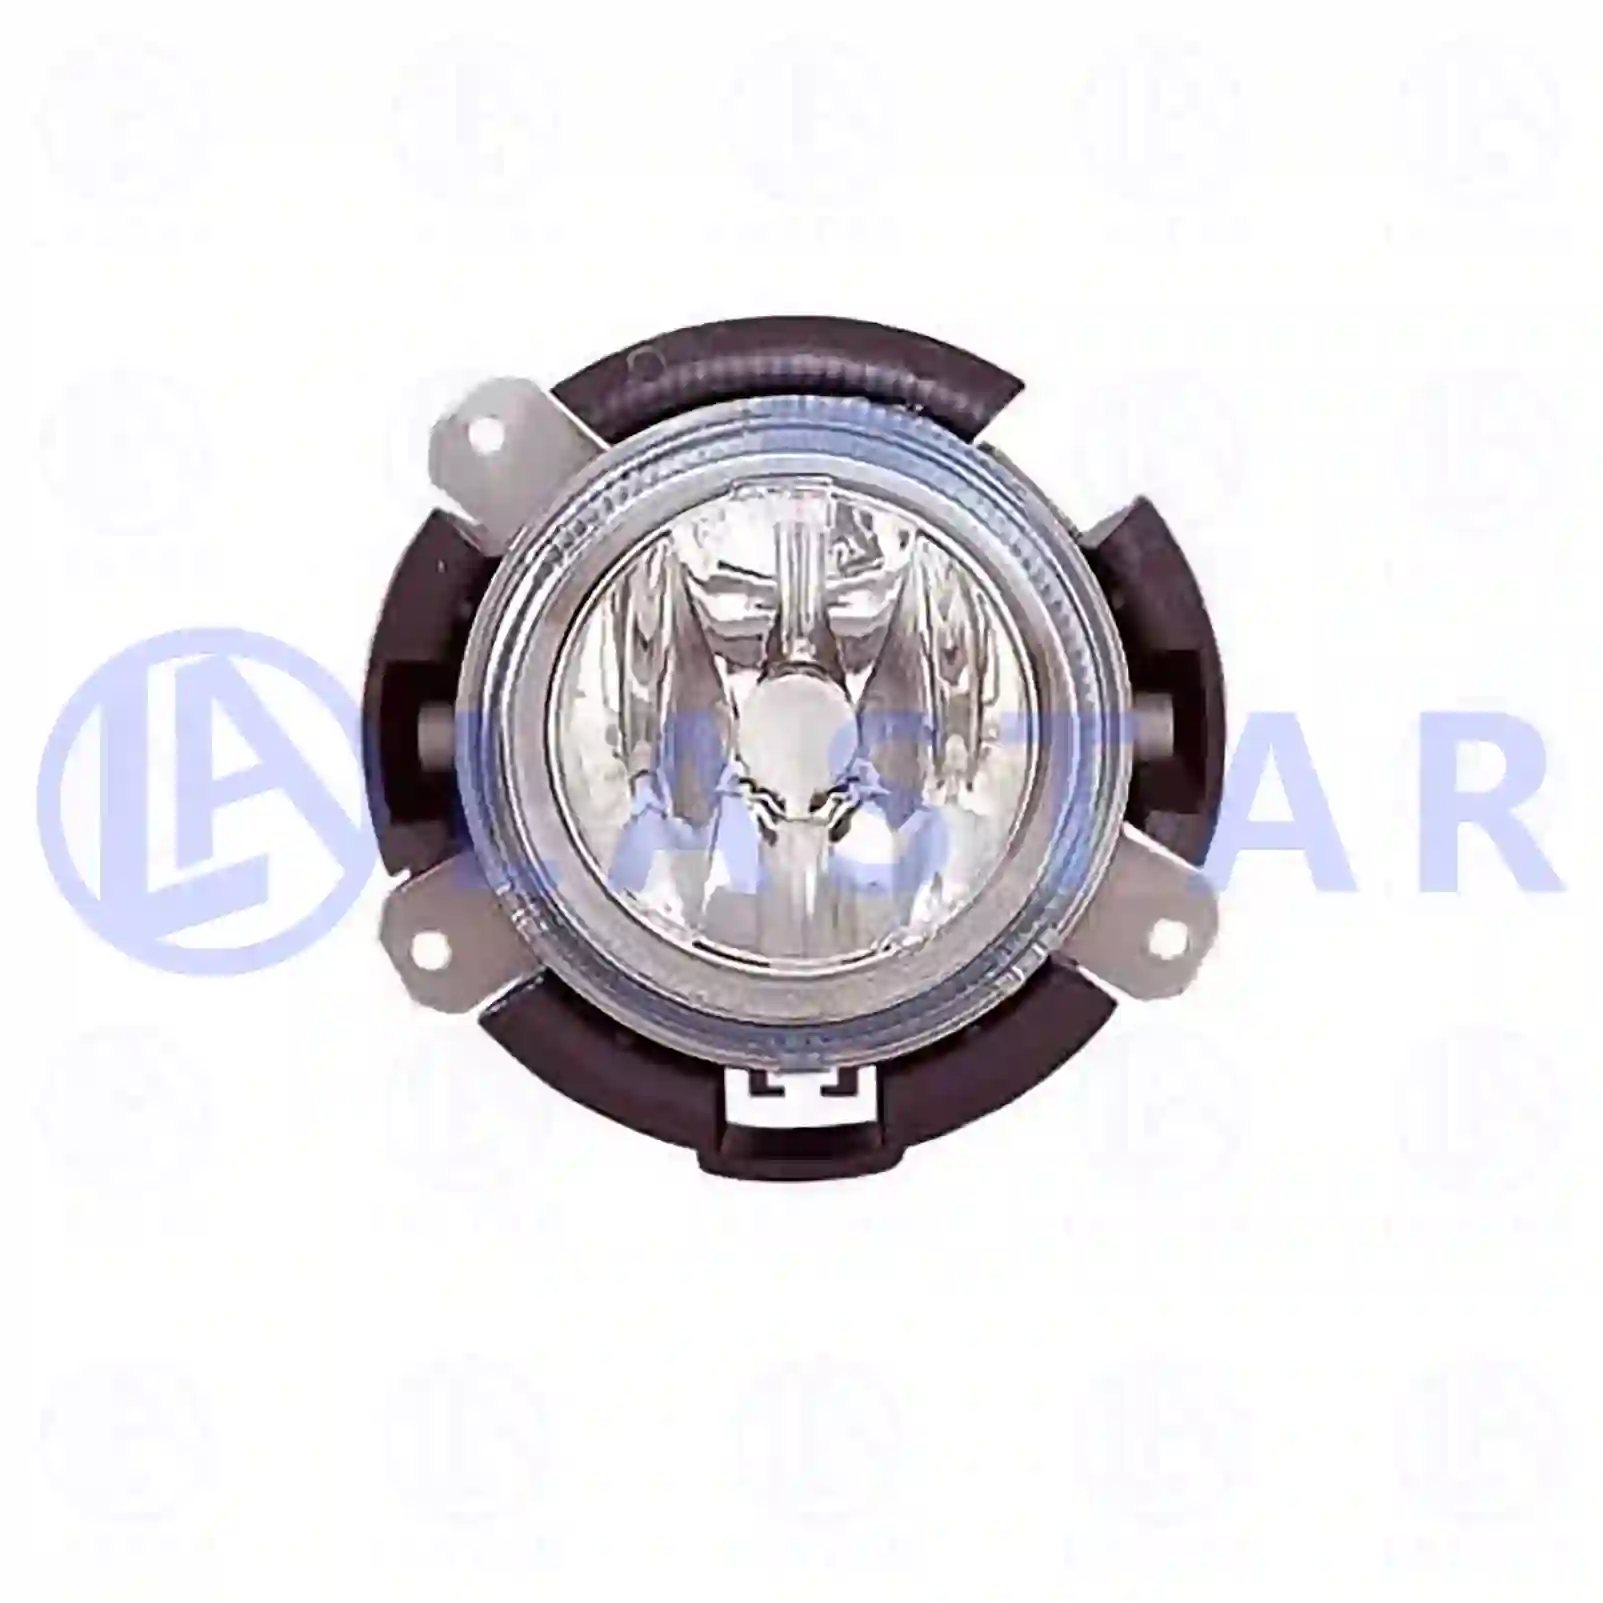 High beam lamp, without bulb, 77710788, 504032148, ZG20551-0008 ||  77710788 Lastar Spare Part | Truck Spare Parts, Auotomotive Spare Parts High beam lamp, without bulb, 77710788, 504032148, ZG20551-0008 ||  77710788 Lastar Spare Part | Truck Spare Parts, Auotomotive Spare Parts